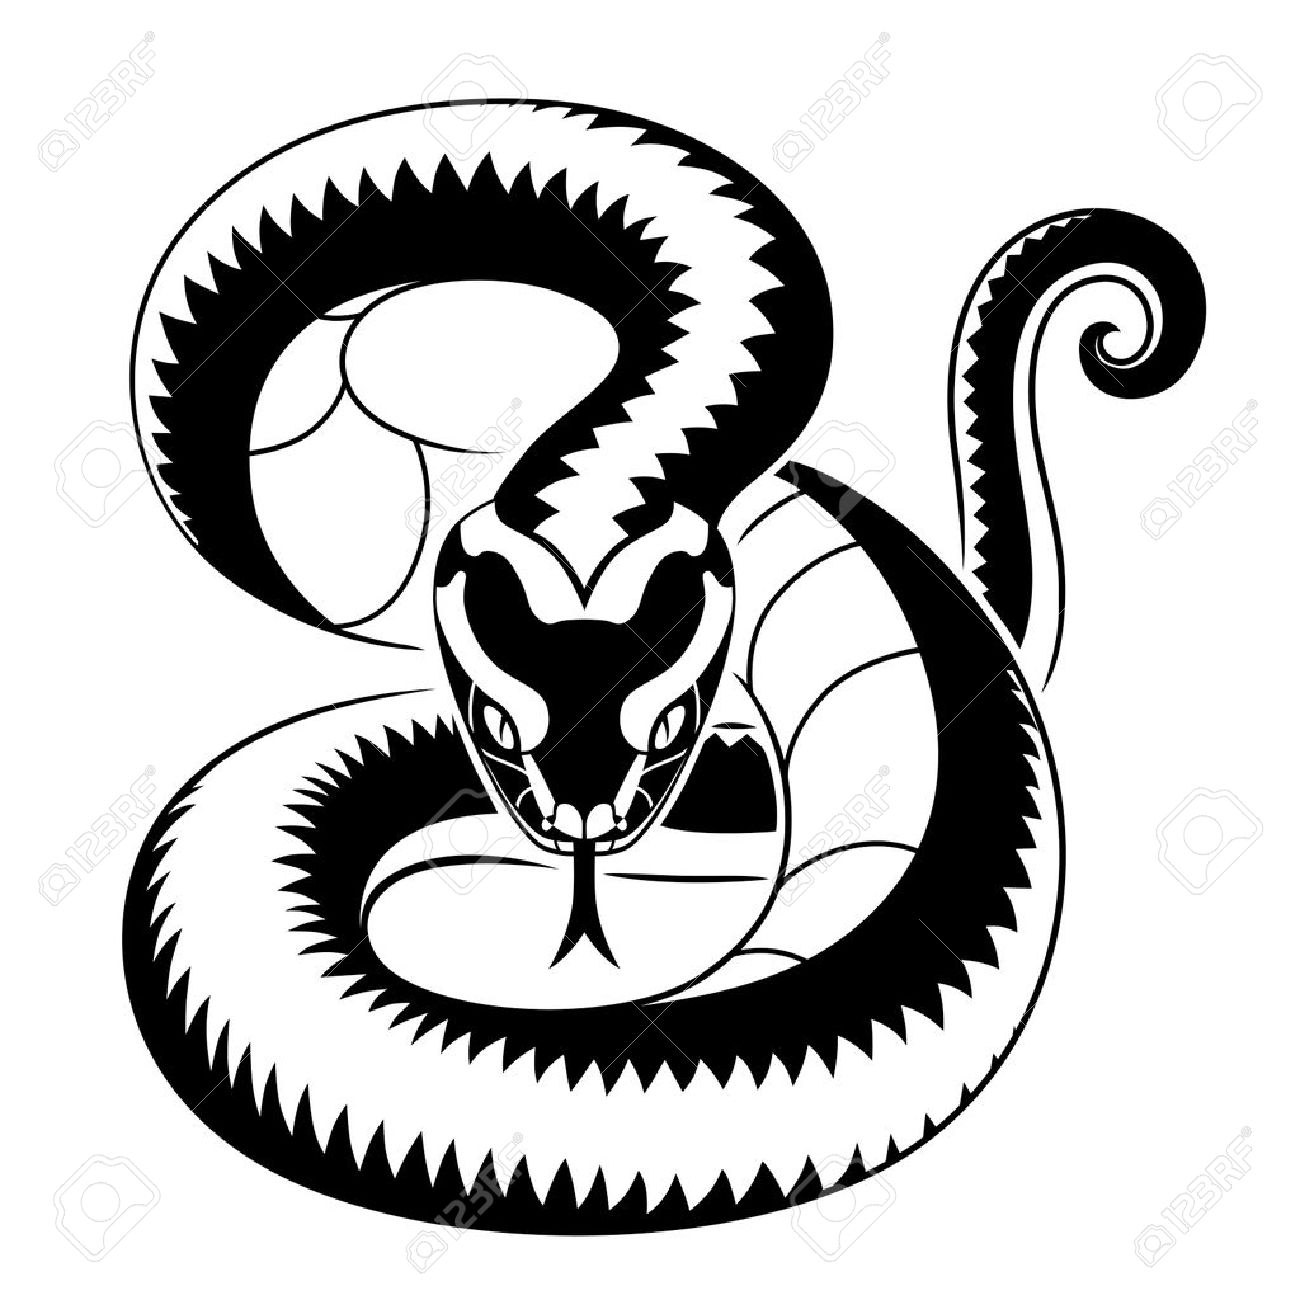 2,493 Viper Stock Vector Illustration And Royalty Free Viper Clipart.